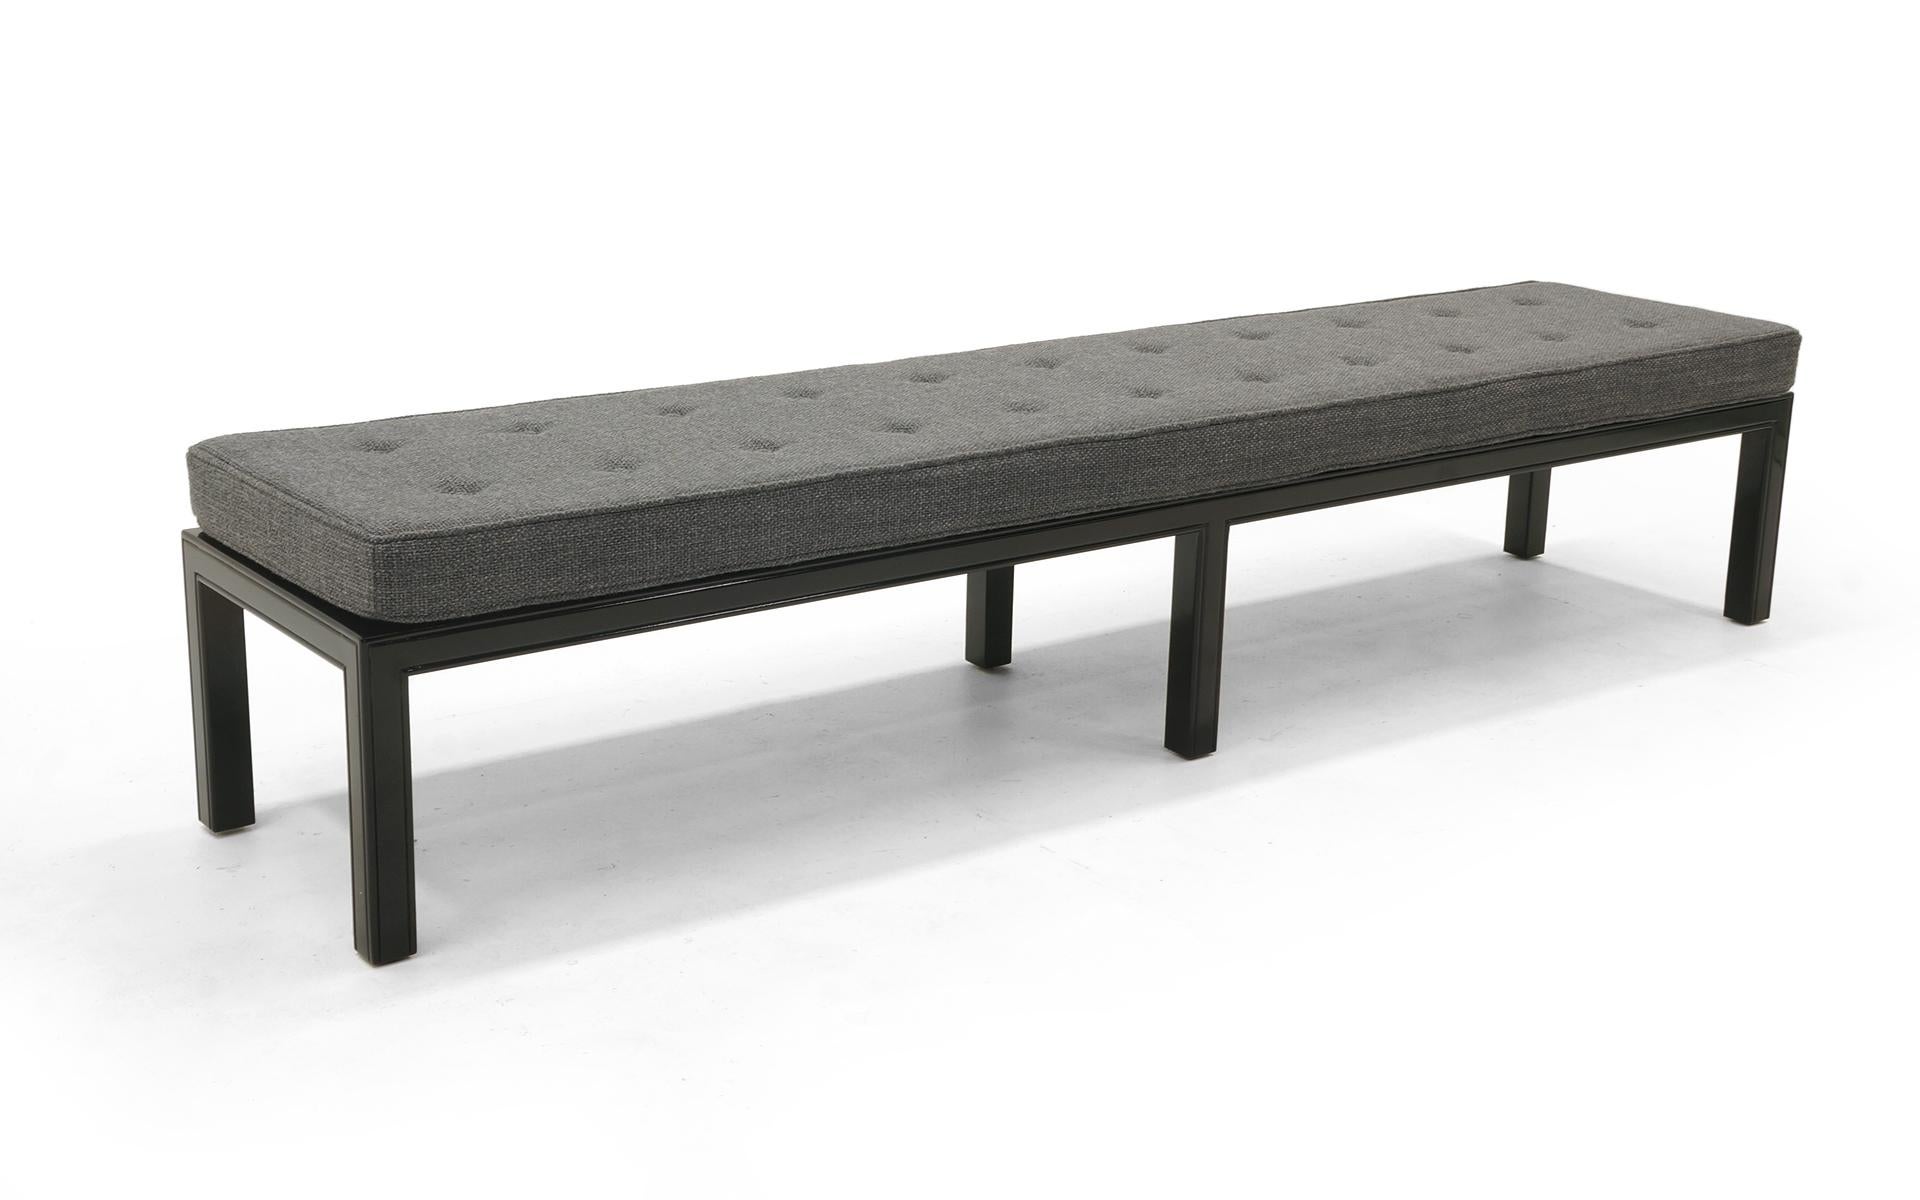 An 84 inch bench by Henredon, 1950s. Completely and expertly restored frames in gloss black conversion varnish (better than lacquer). New cushion with Maharam charcoal grey / medium grey fabric.